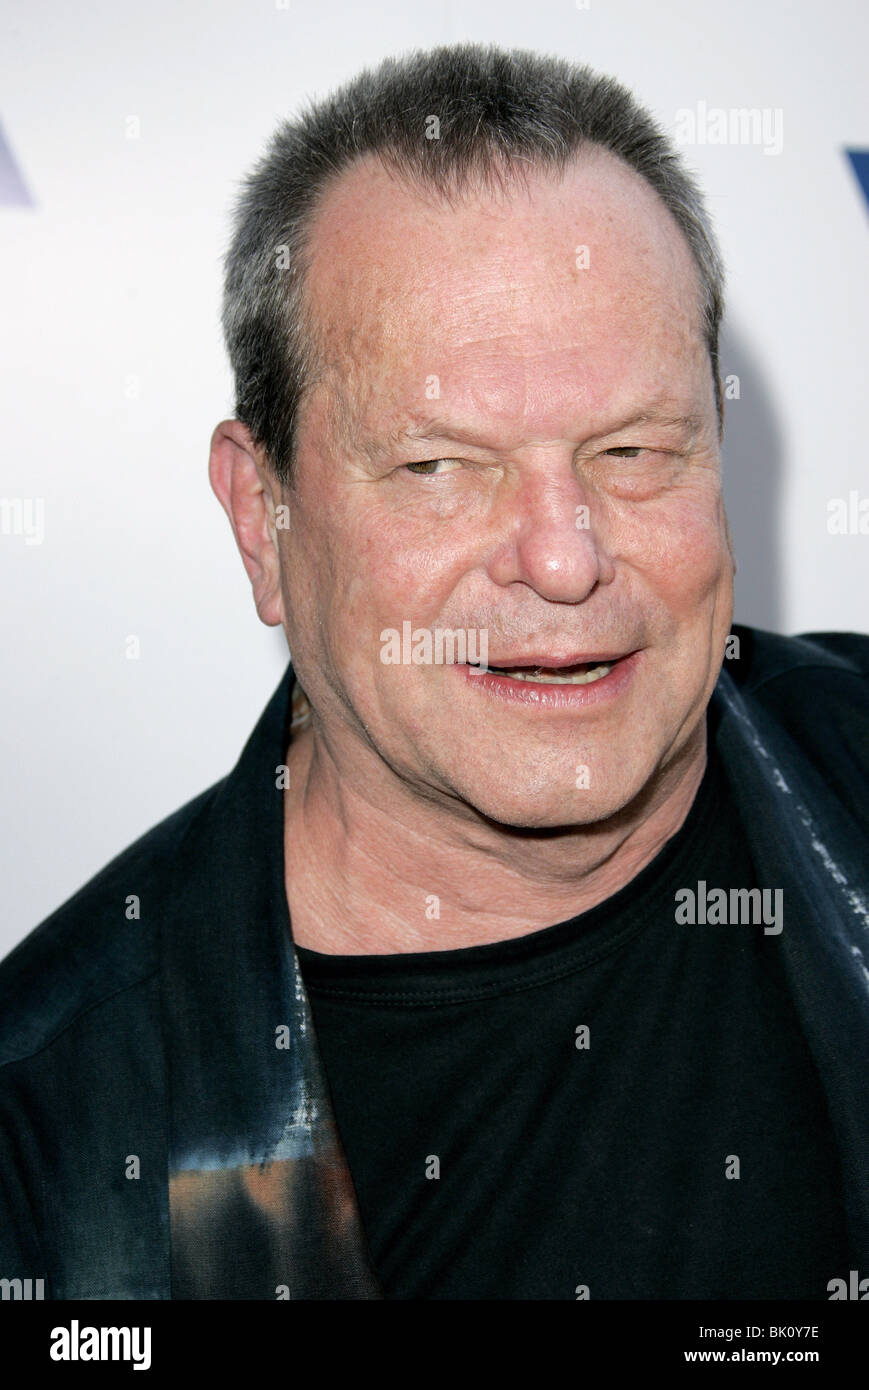 TERRY GILLIAM THE BROTHERS GRIMM FILM PREMI DIRECTORS GUILD OF AMERICA HOLLWOOD LA USA 08 August 2005 Stock Photo